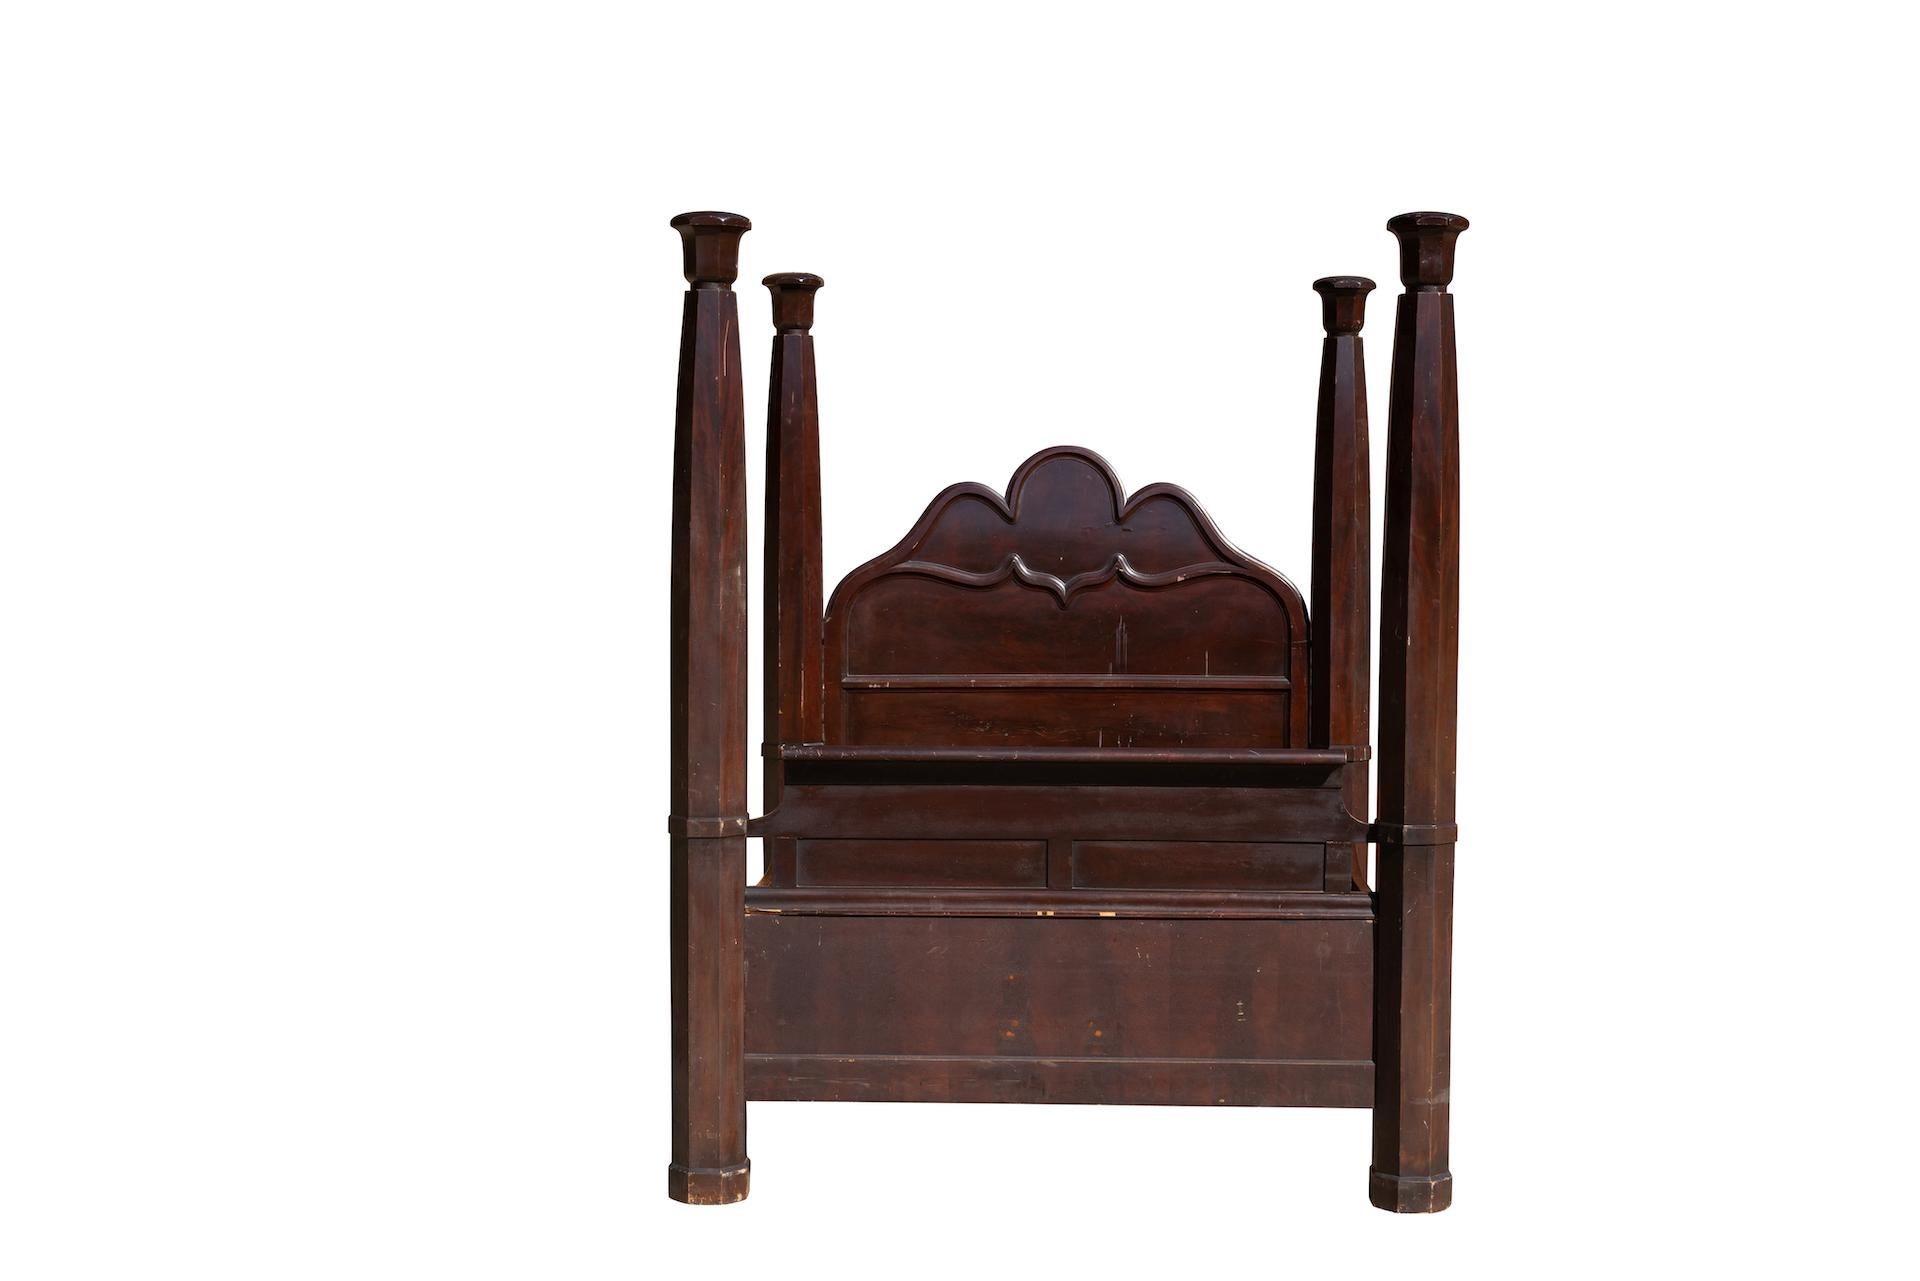 Plantation four poster bed of solid mahogany, queen size. Circa 1850s. Substantial and extremely heavy, the solid mahogany of the four posters was harvested from primordial forests and shipped from England to the United States. The bed design